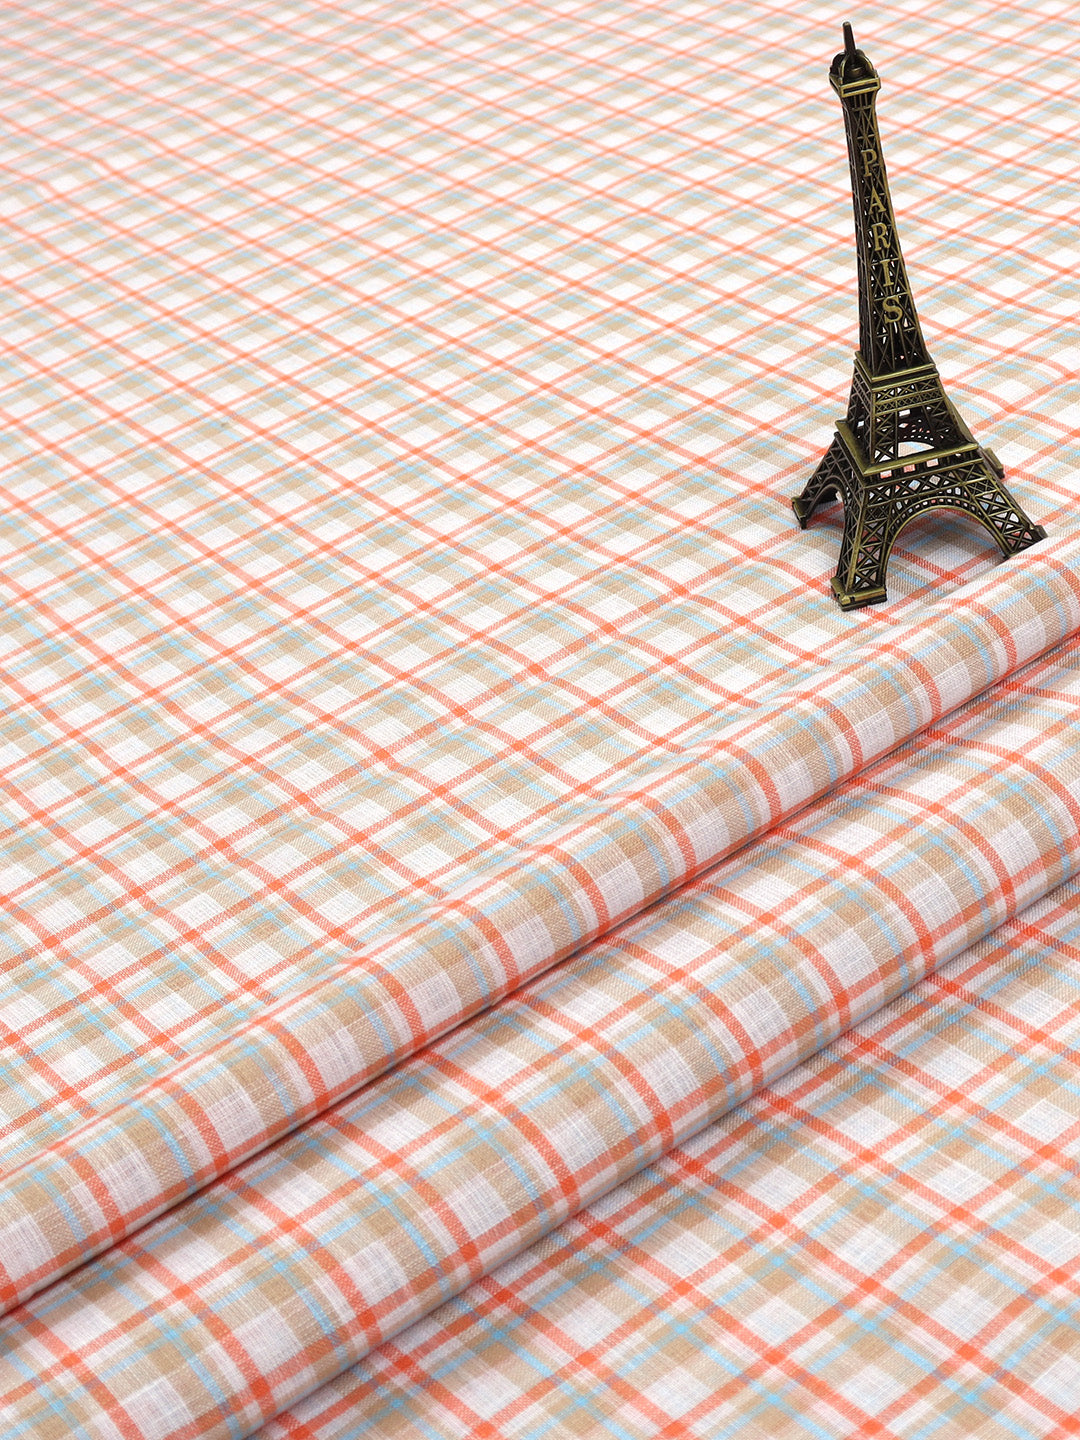 Cotton Colour Check Orange & Brown Shirting Fabric High Style-Close view